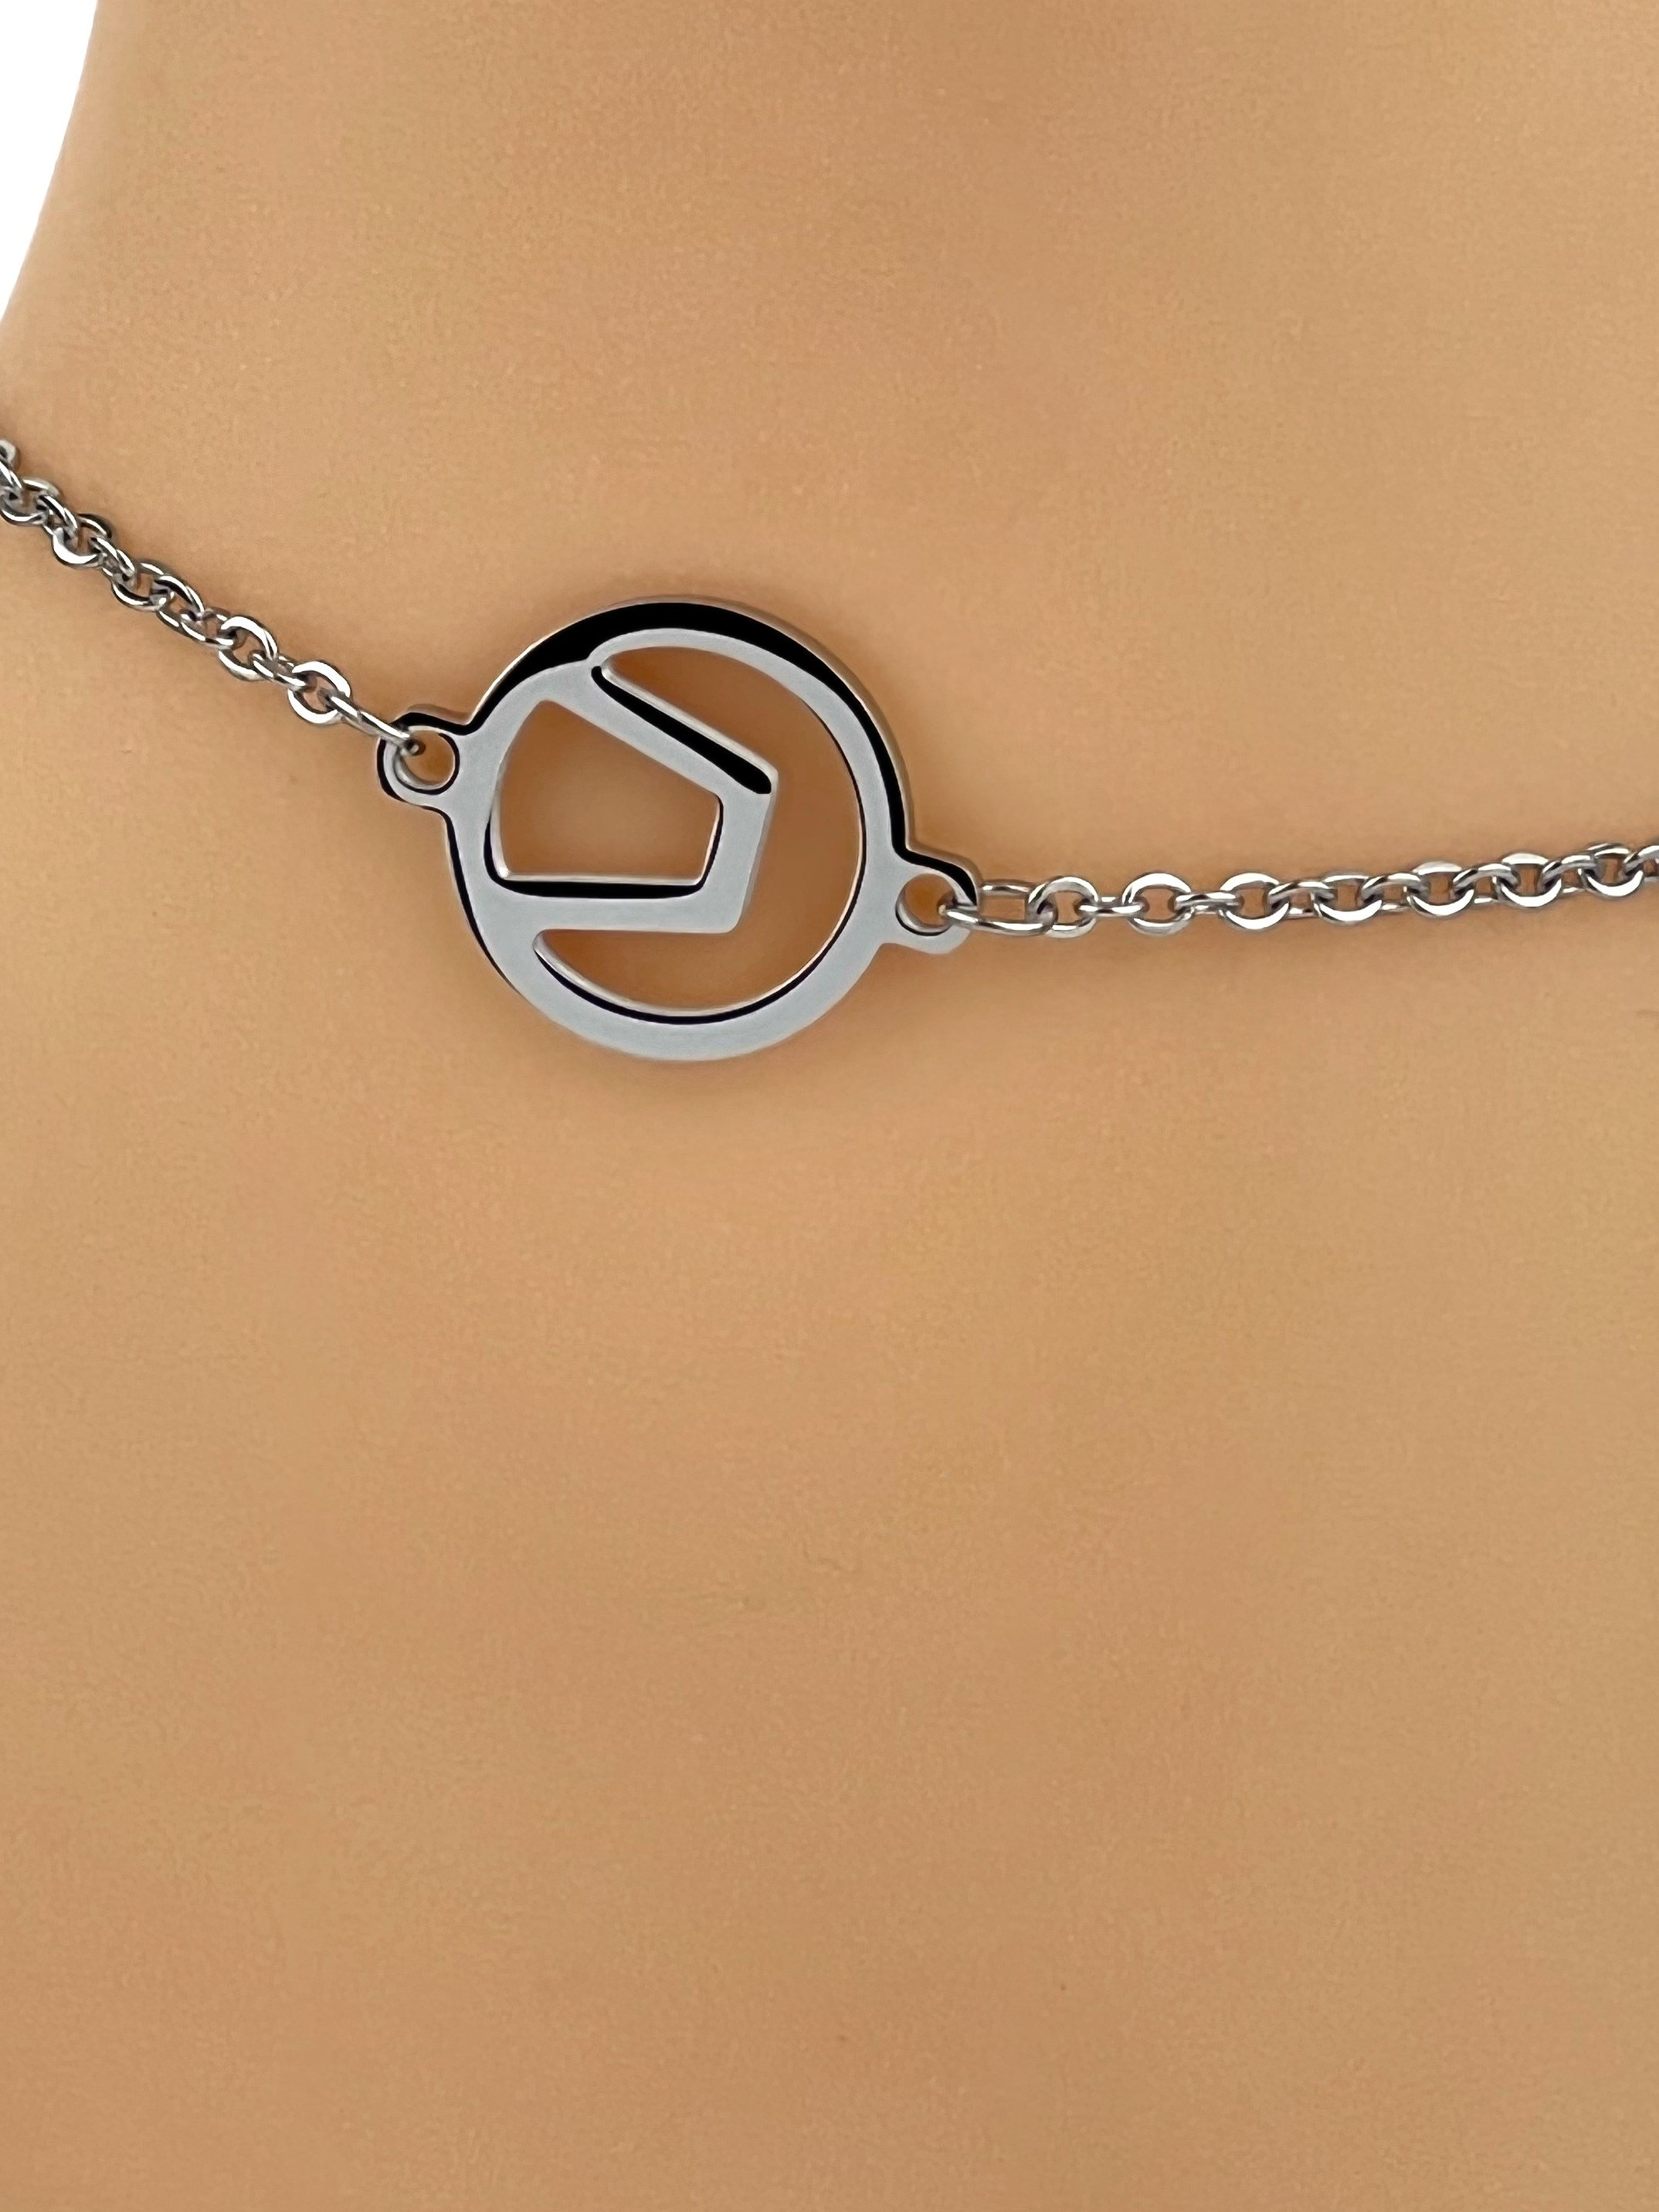 Swingers Anklet Swing Pendant Jewelry picture